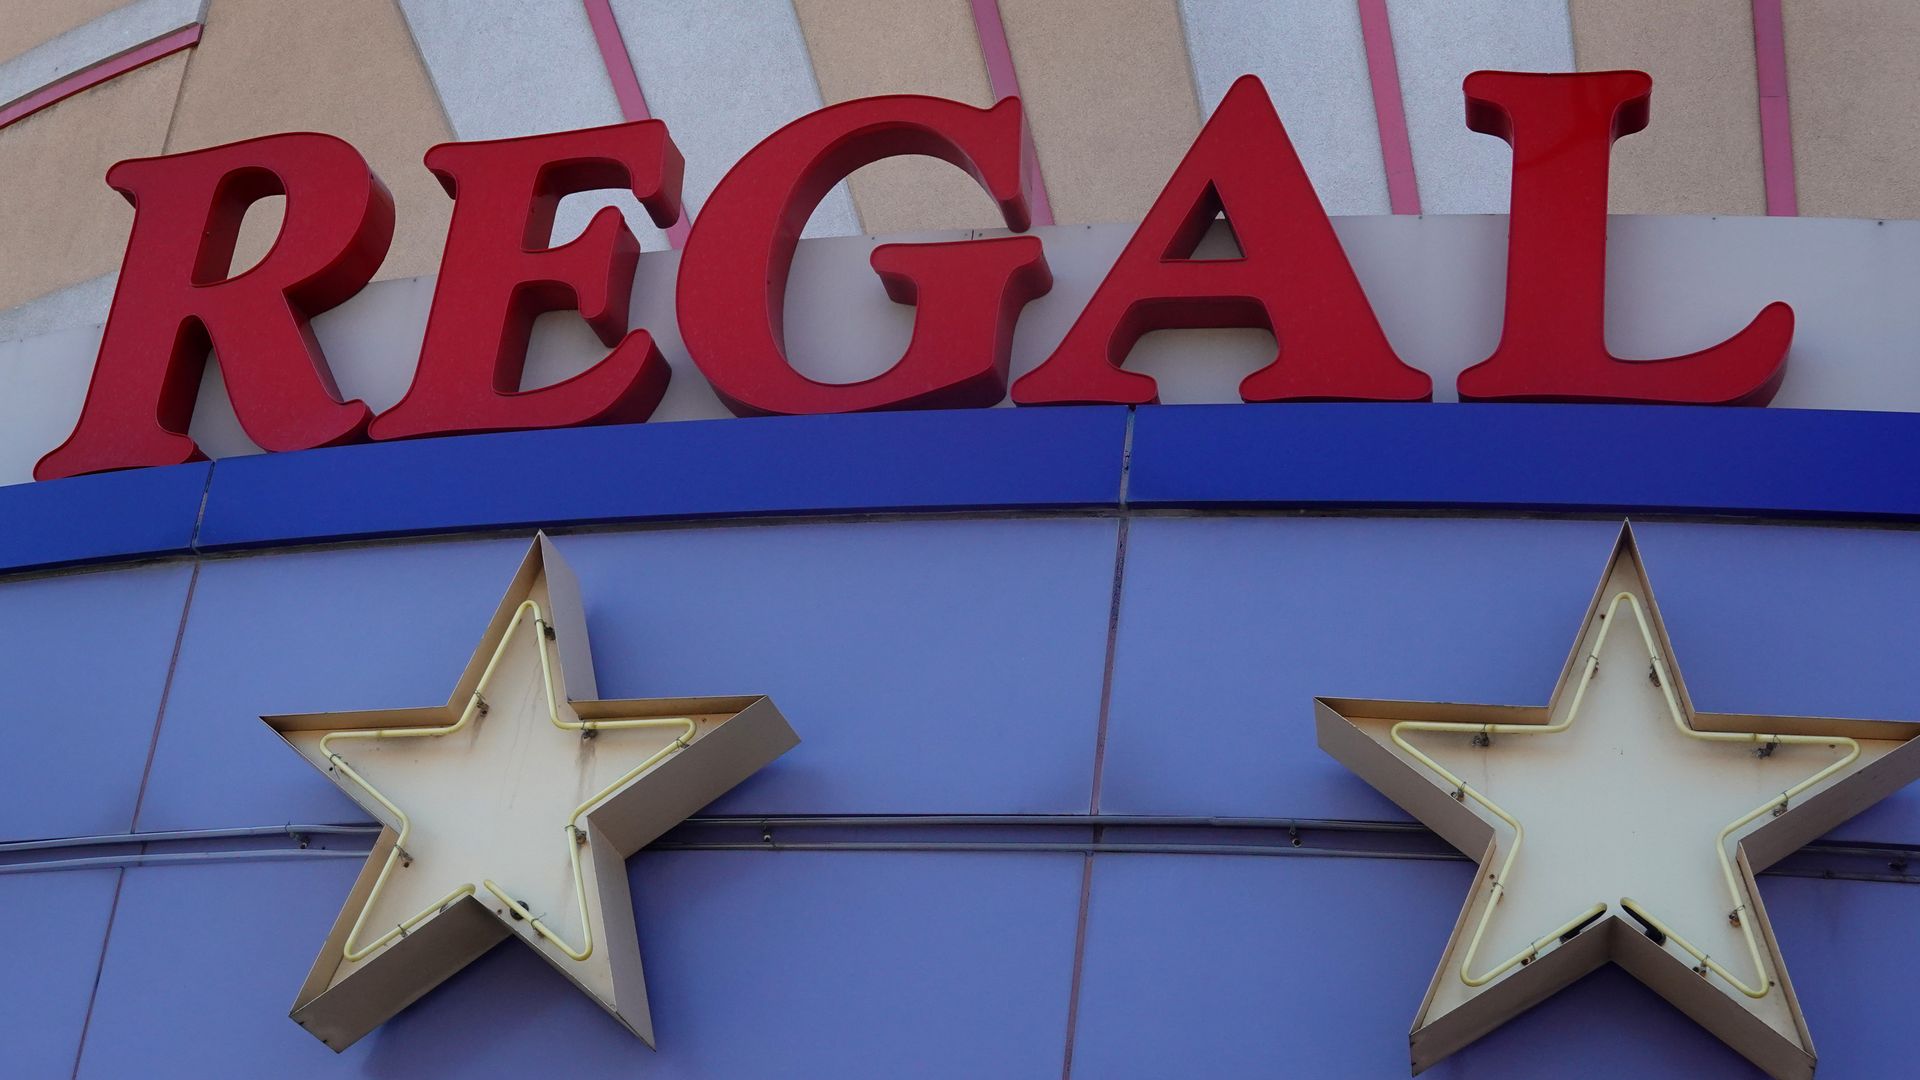 Sign says Regal with stars underneath on exterior of movie theater building